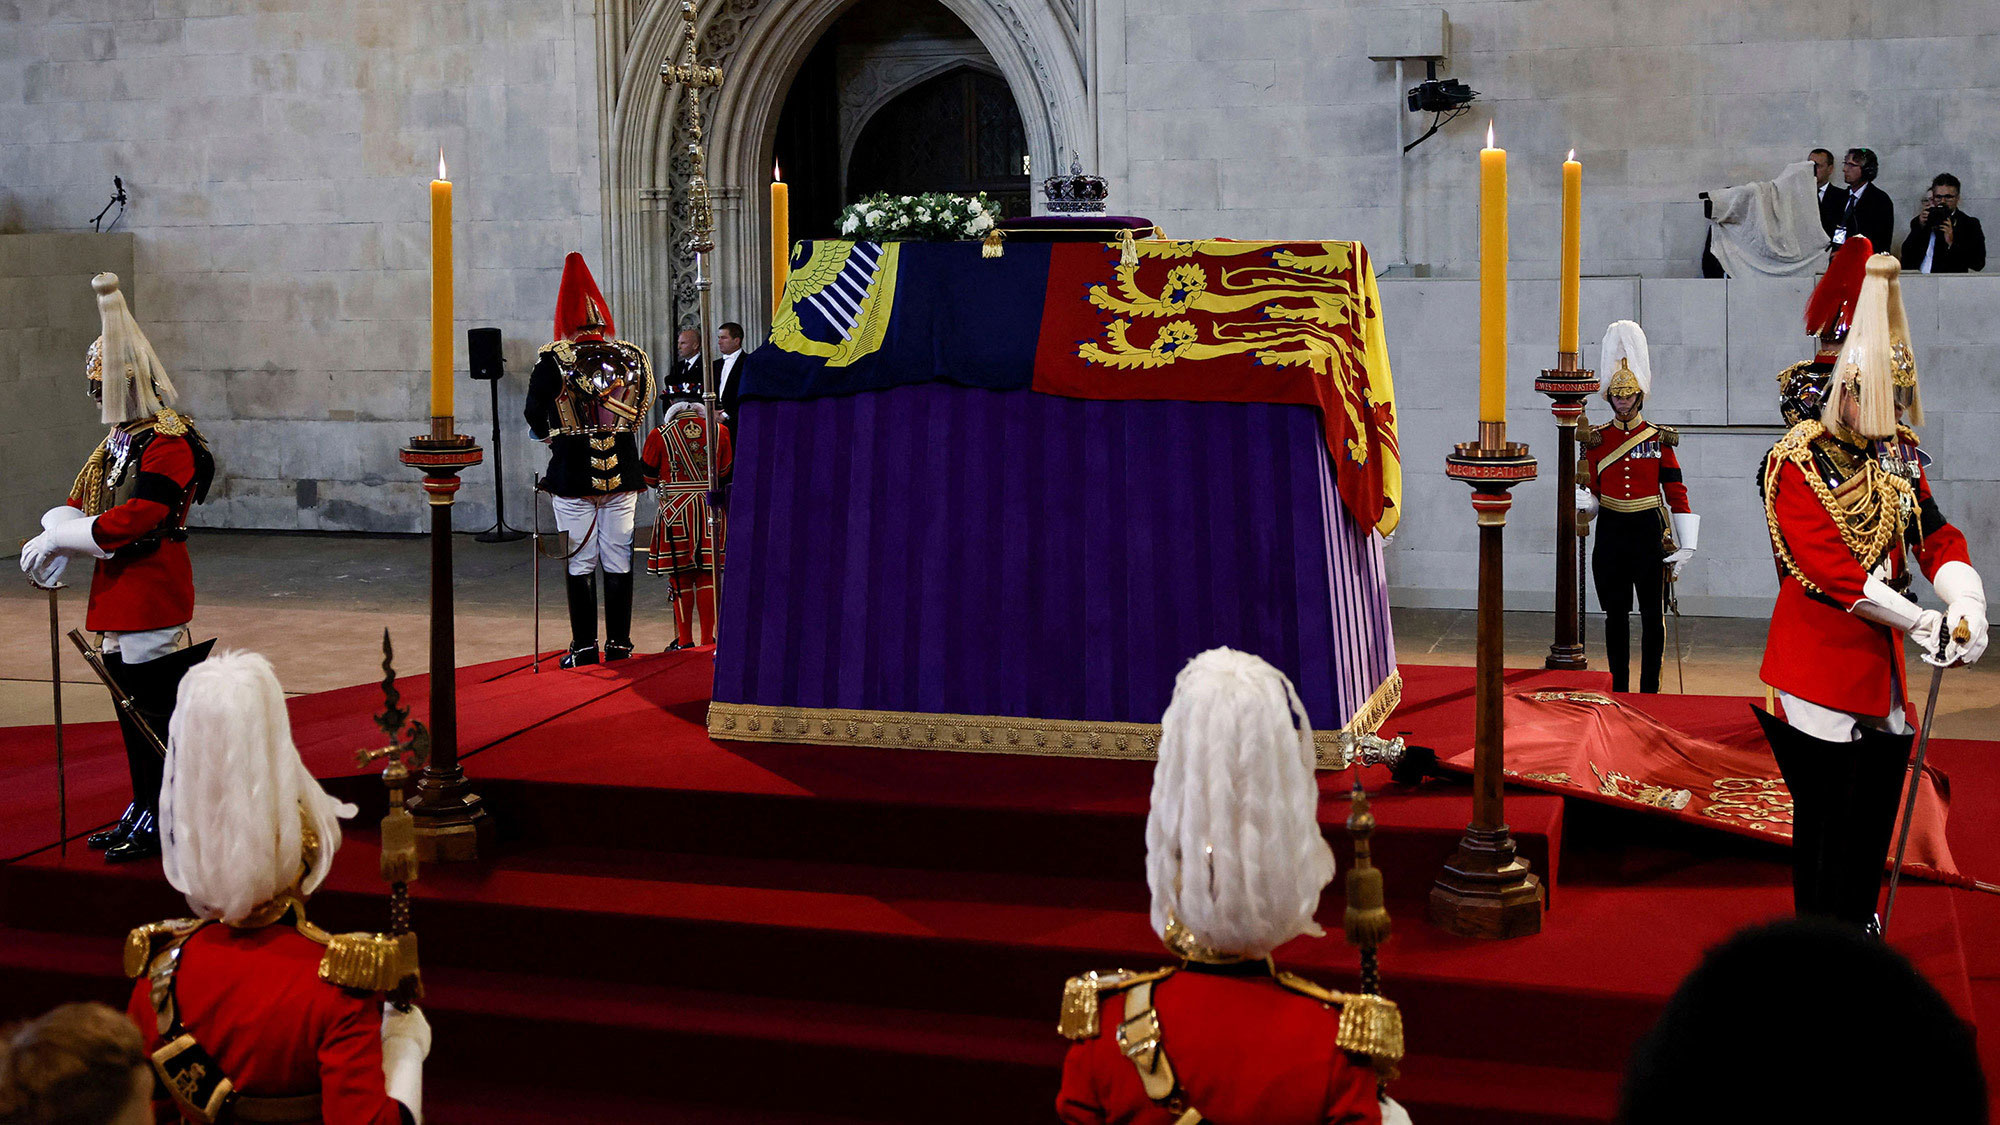 The coffin of Queen Elizabeth II, adorned with the Imperial State Crown, rests on a raised platform inside London's Westminster Hall on Wednesday, September 14.